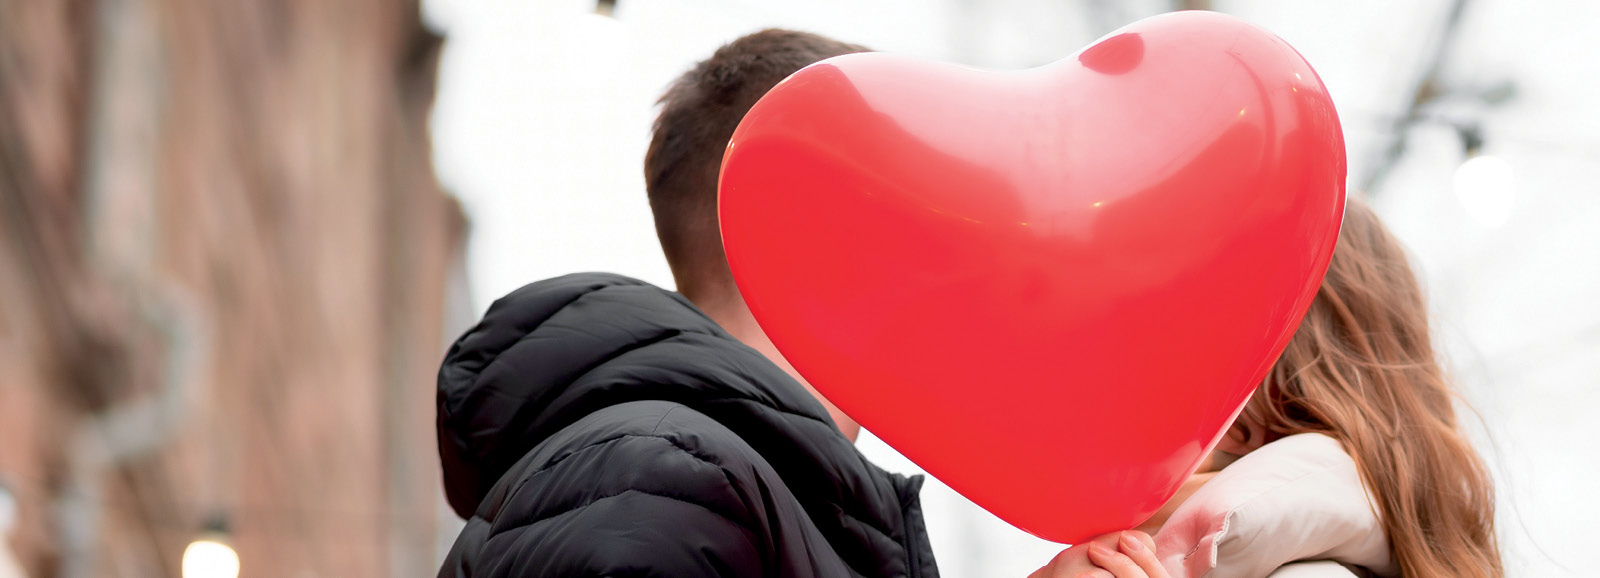 couple-with-heart-shaped-balloon-1600x578.png